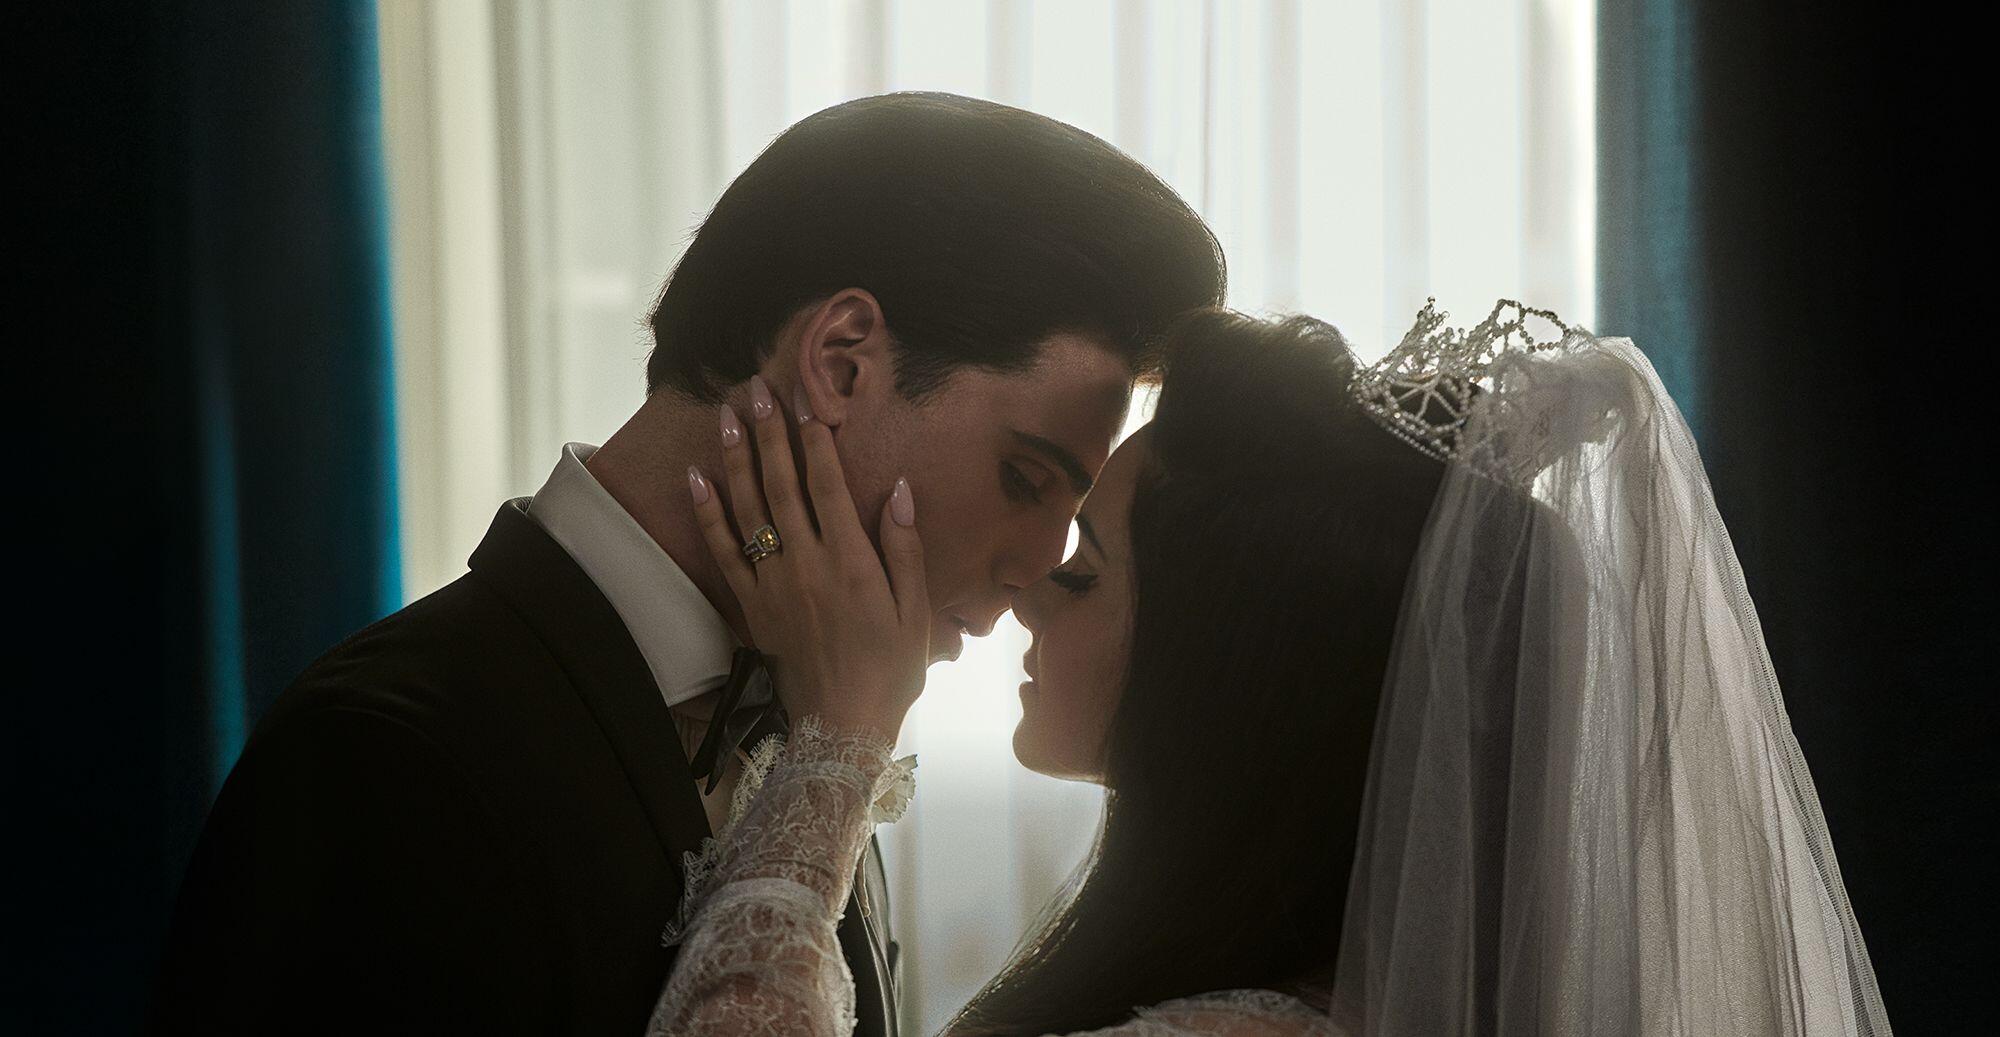 Jacob Elordi and Cailee Spaeny kiss as Elvis and Priscilla Presley on their wedding day in the movie "Priscilla."